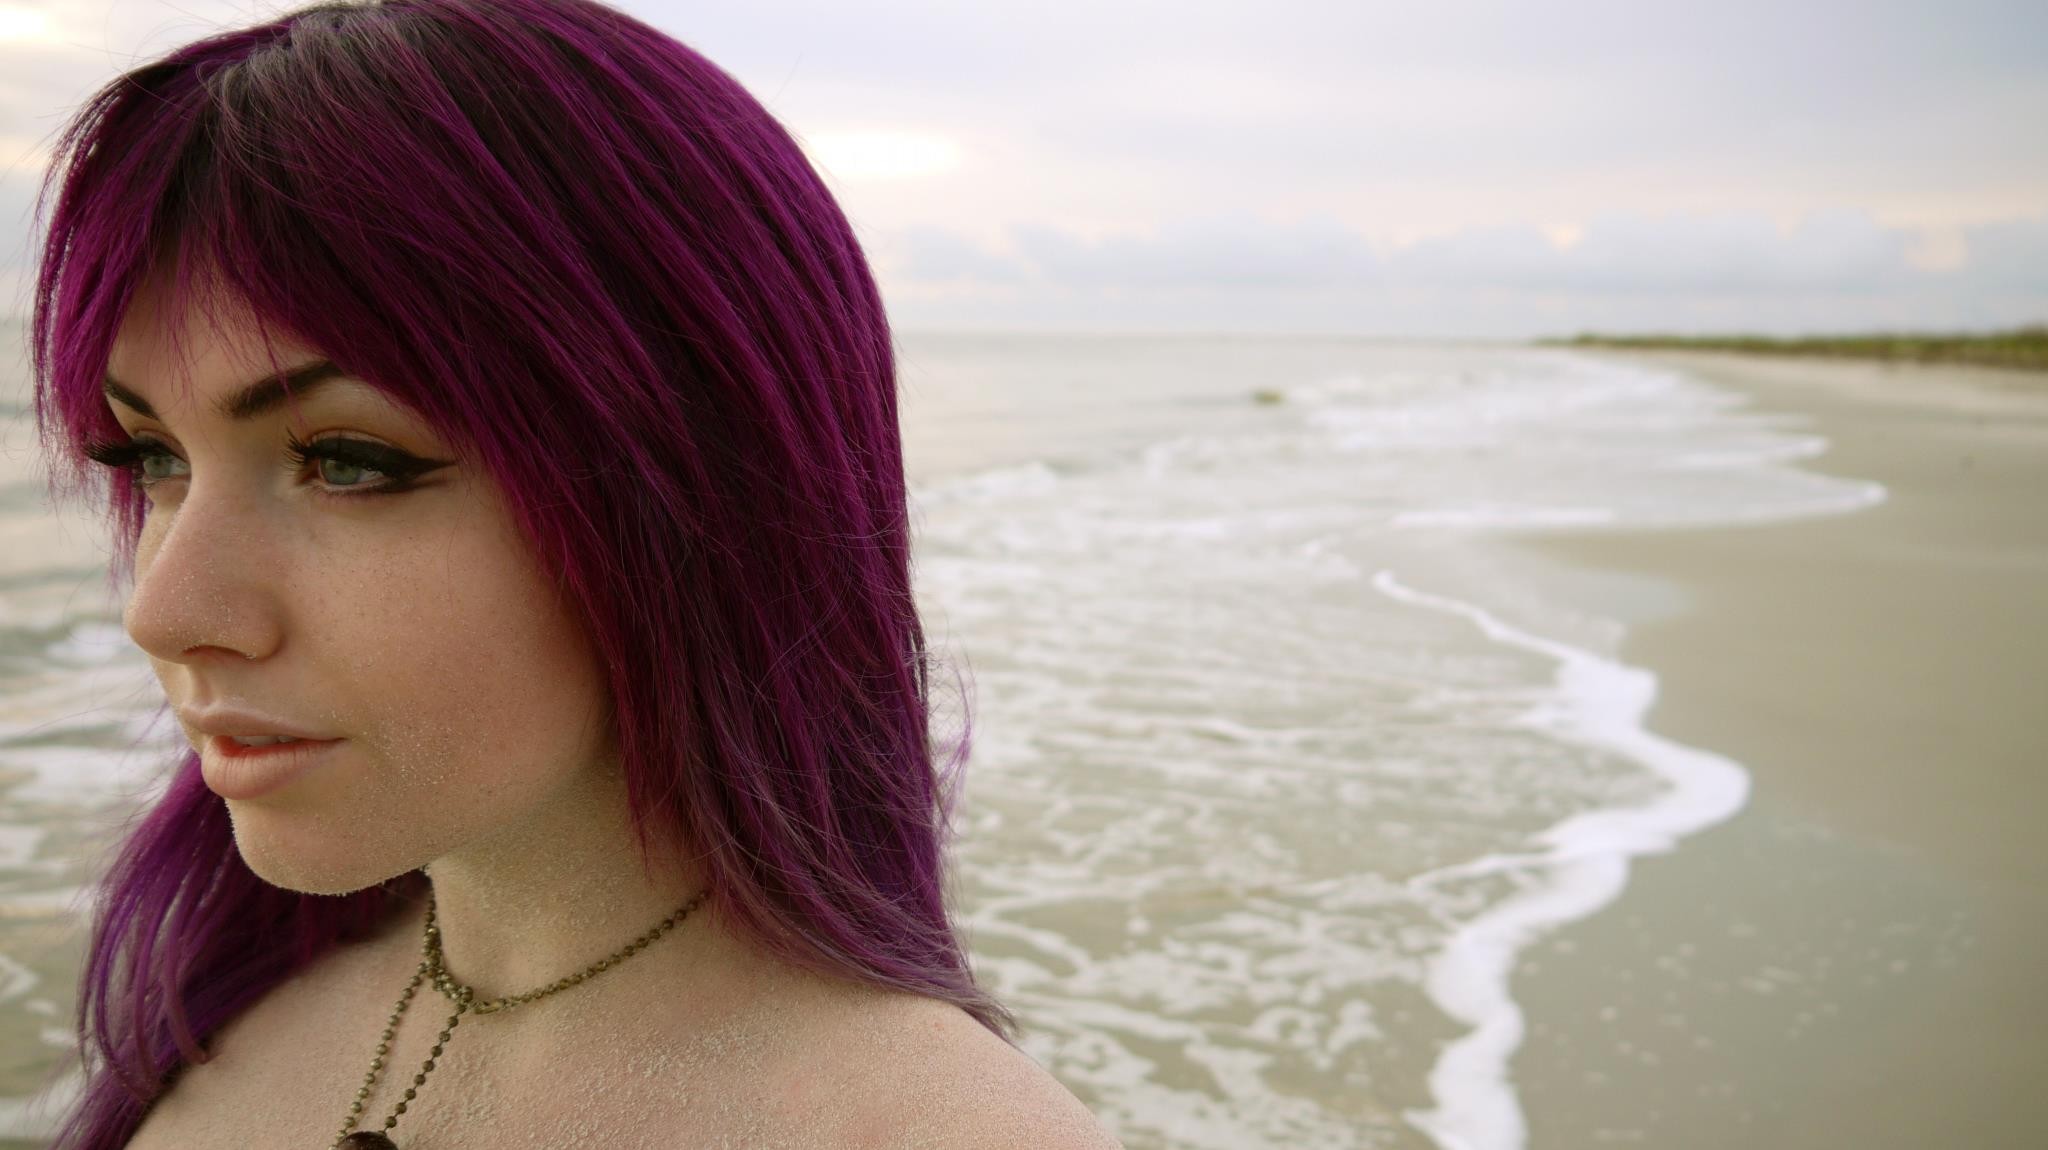 A girl with red hair on the seashore